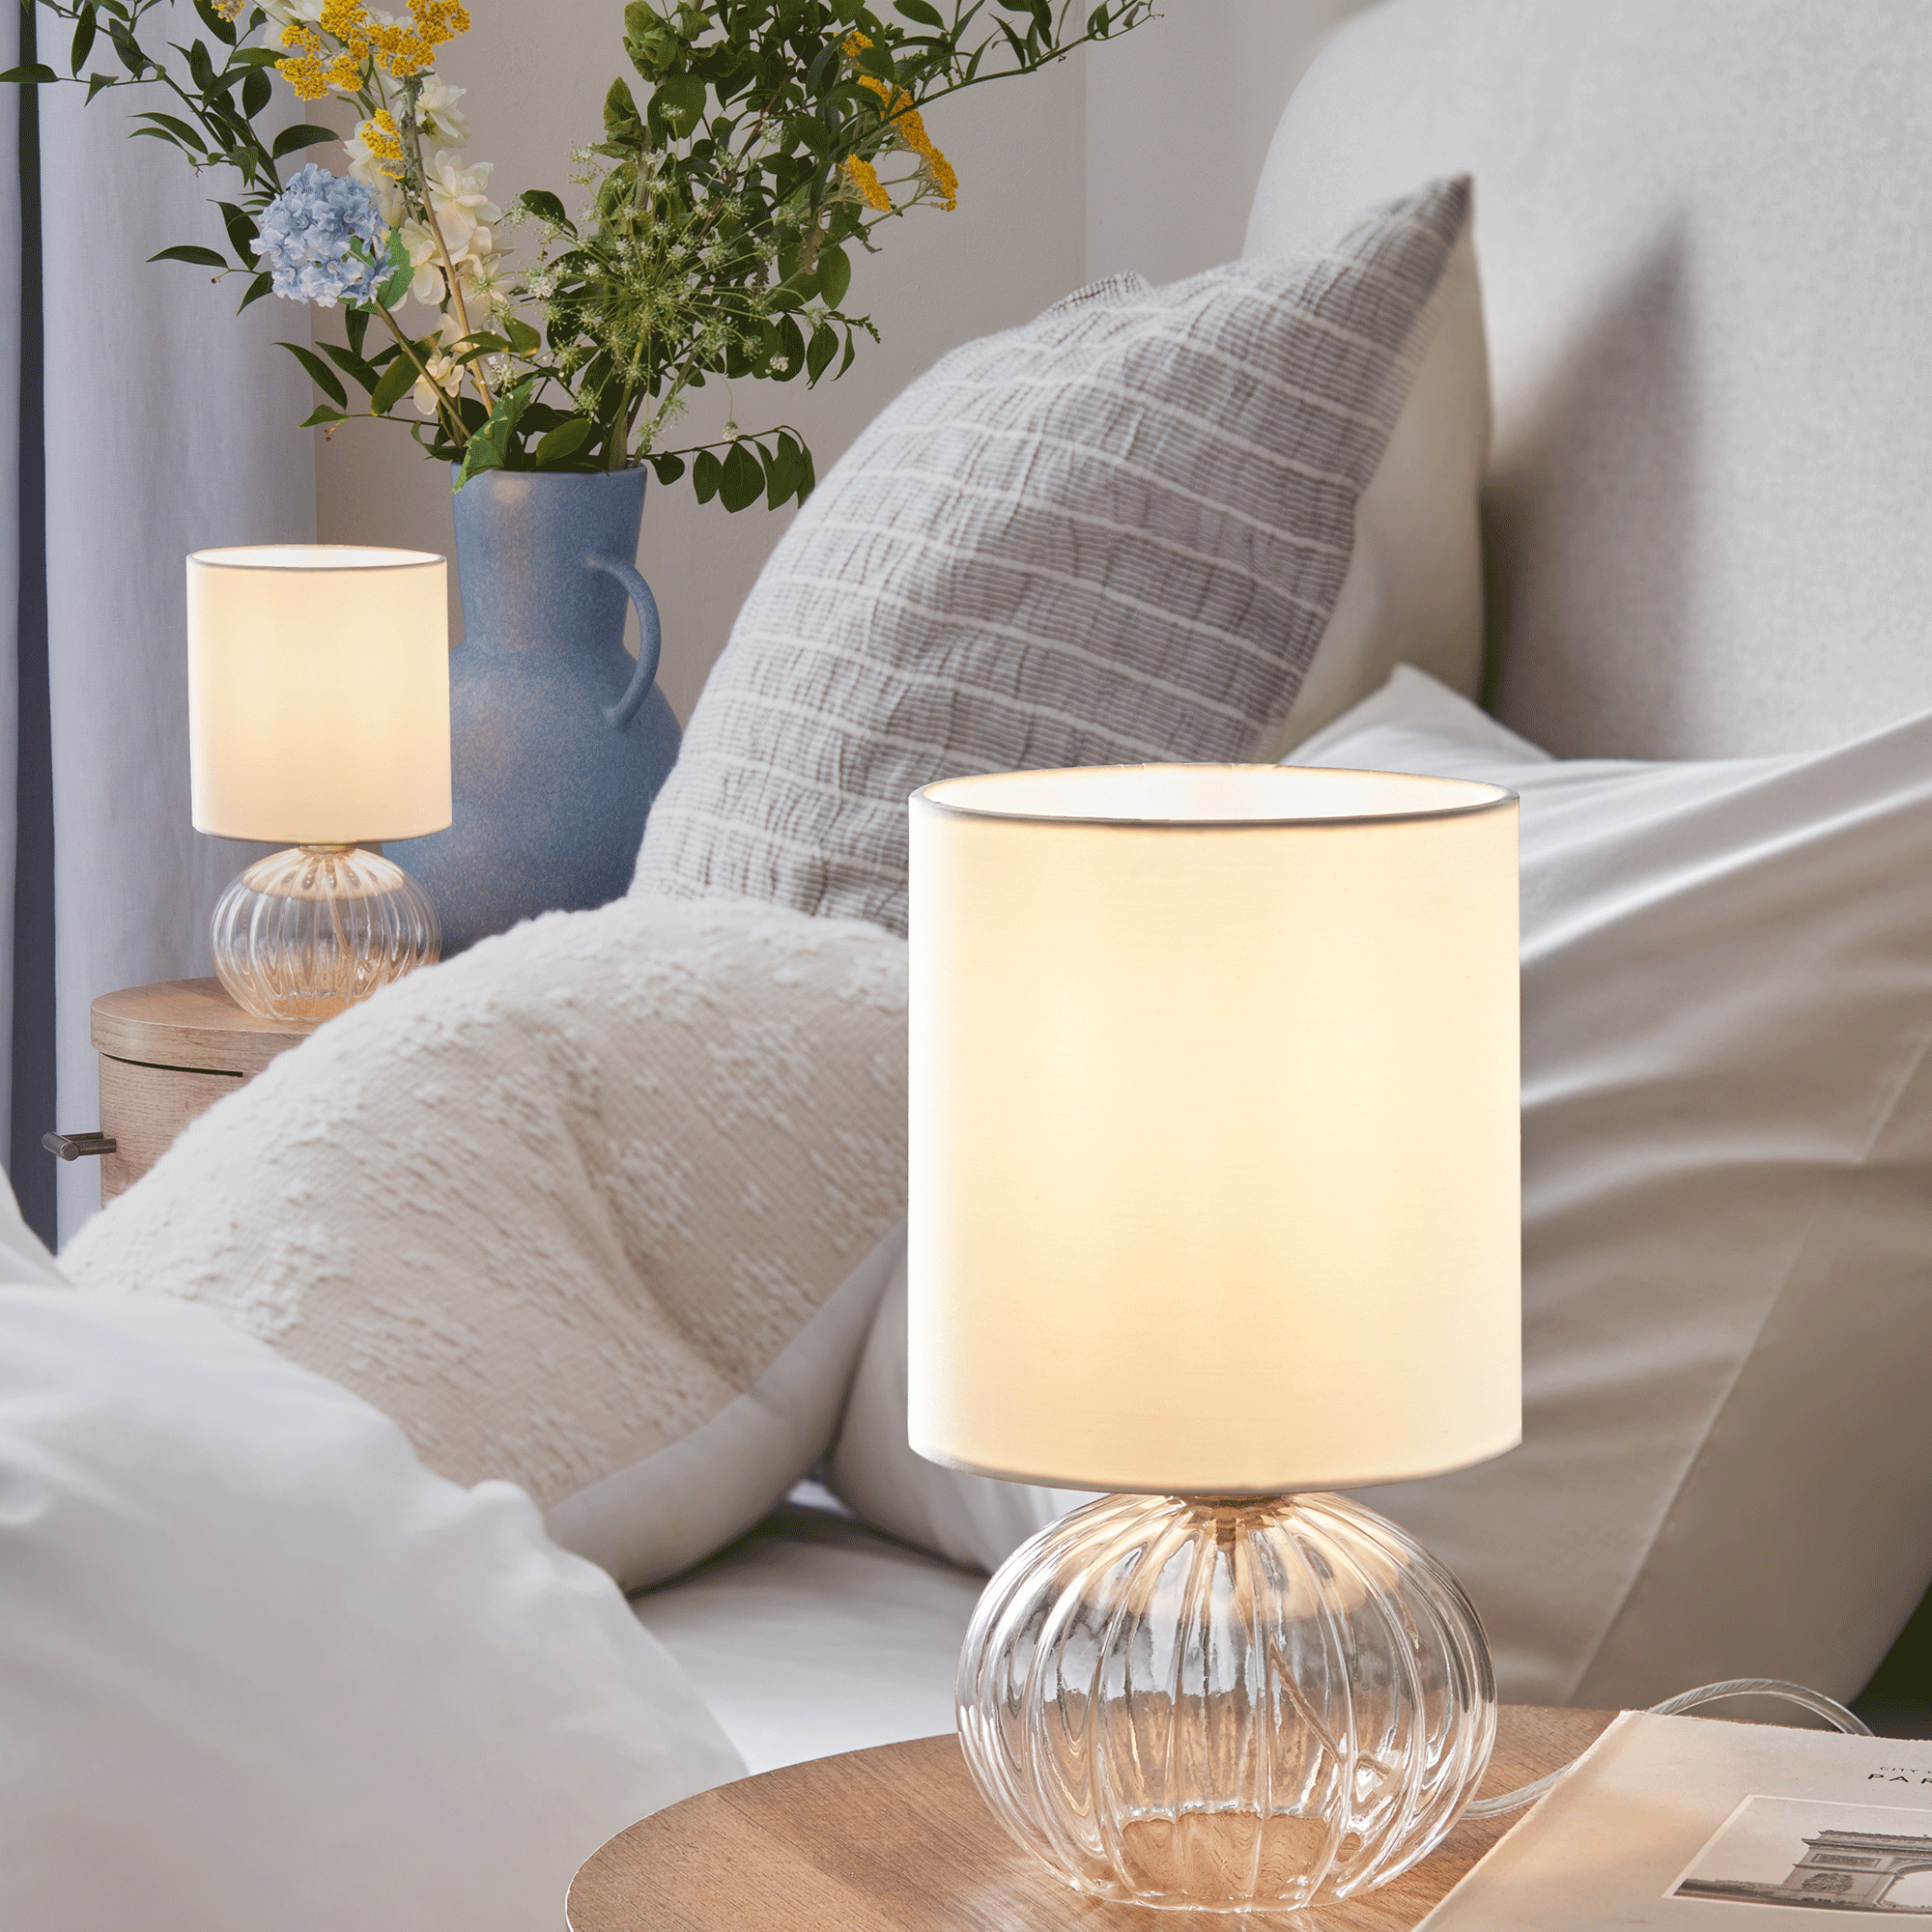 Lamps on bedside table with blue bedding